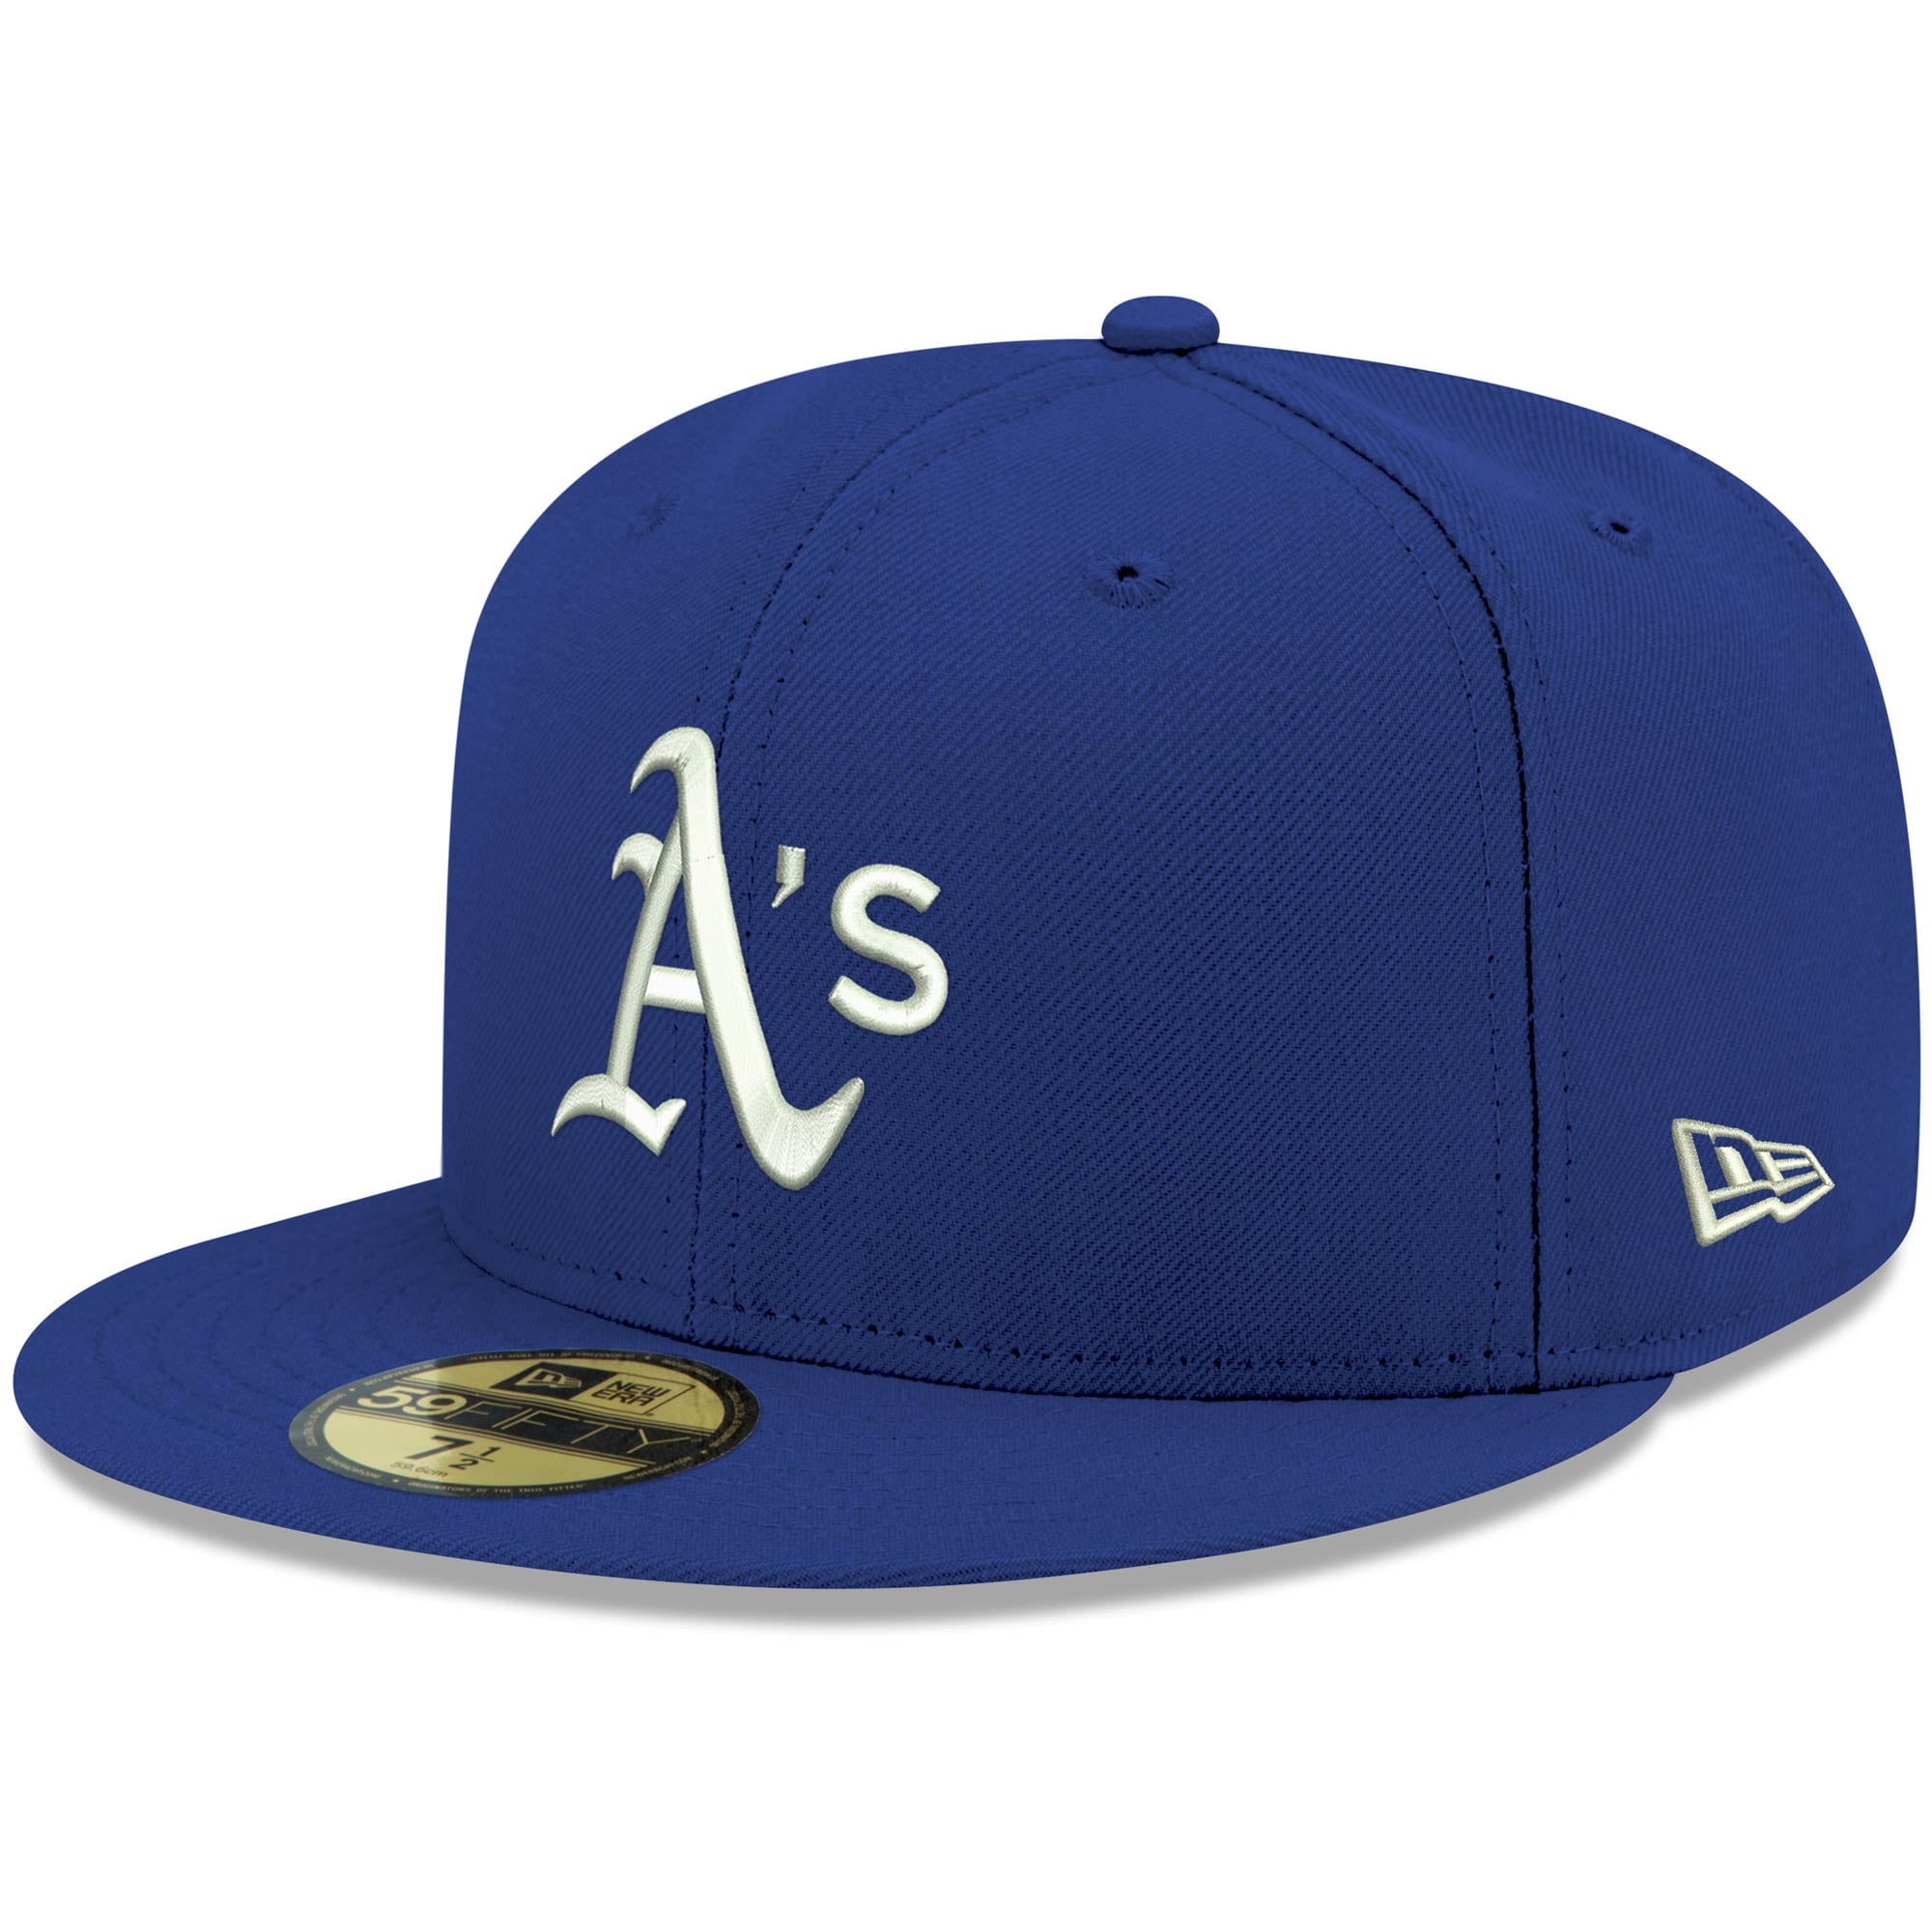 Men's New Era Royal Oakland Athletics White Logo 59FIFTY Fitted Hat 